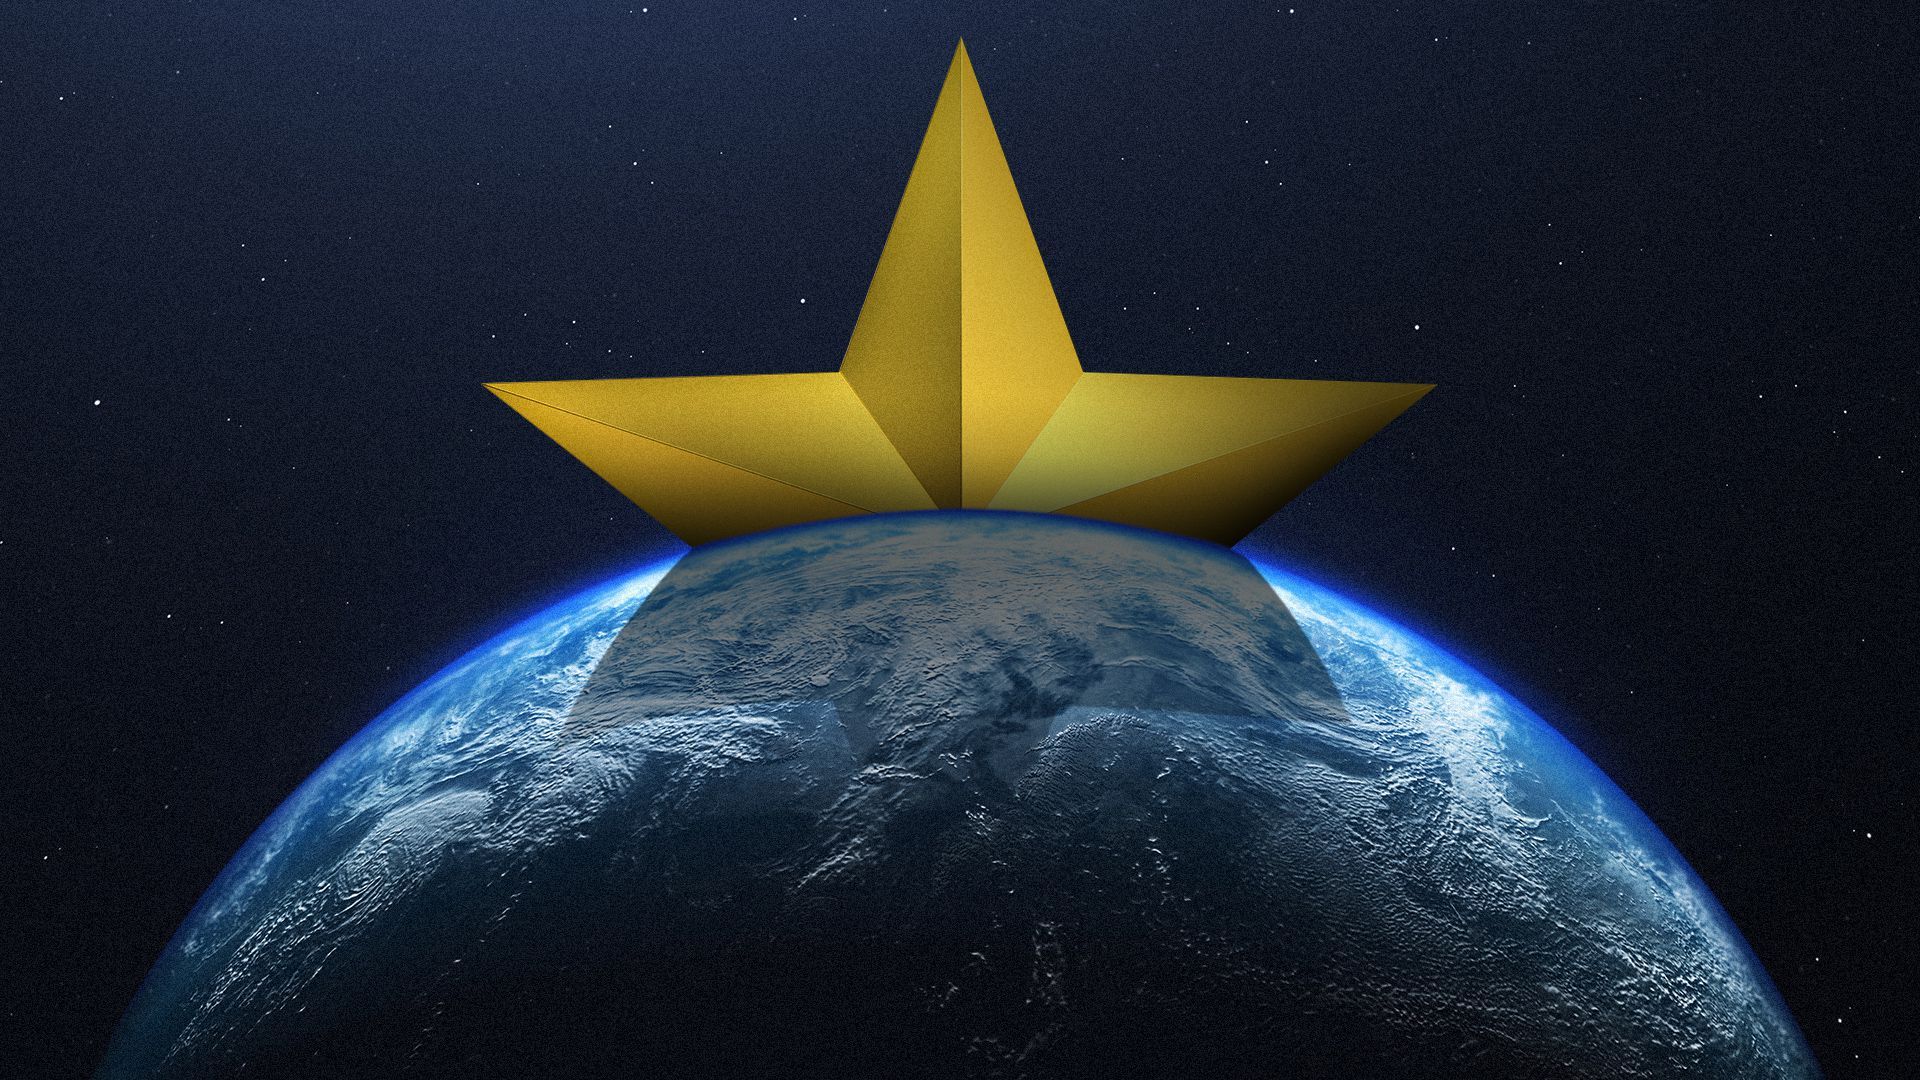 Illustration of a giant yellow star rising over the Earth in space and casting a giant shadow. 